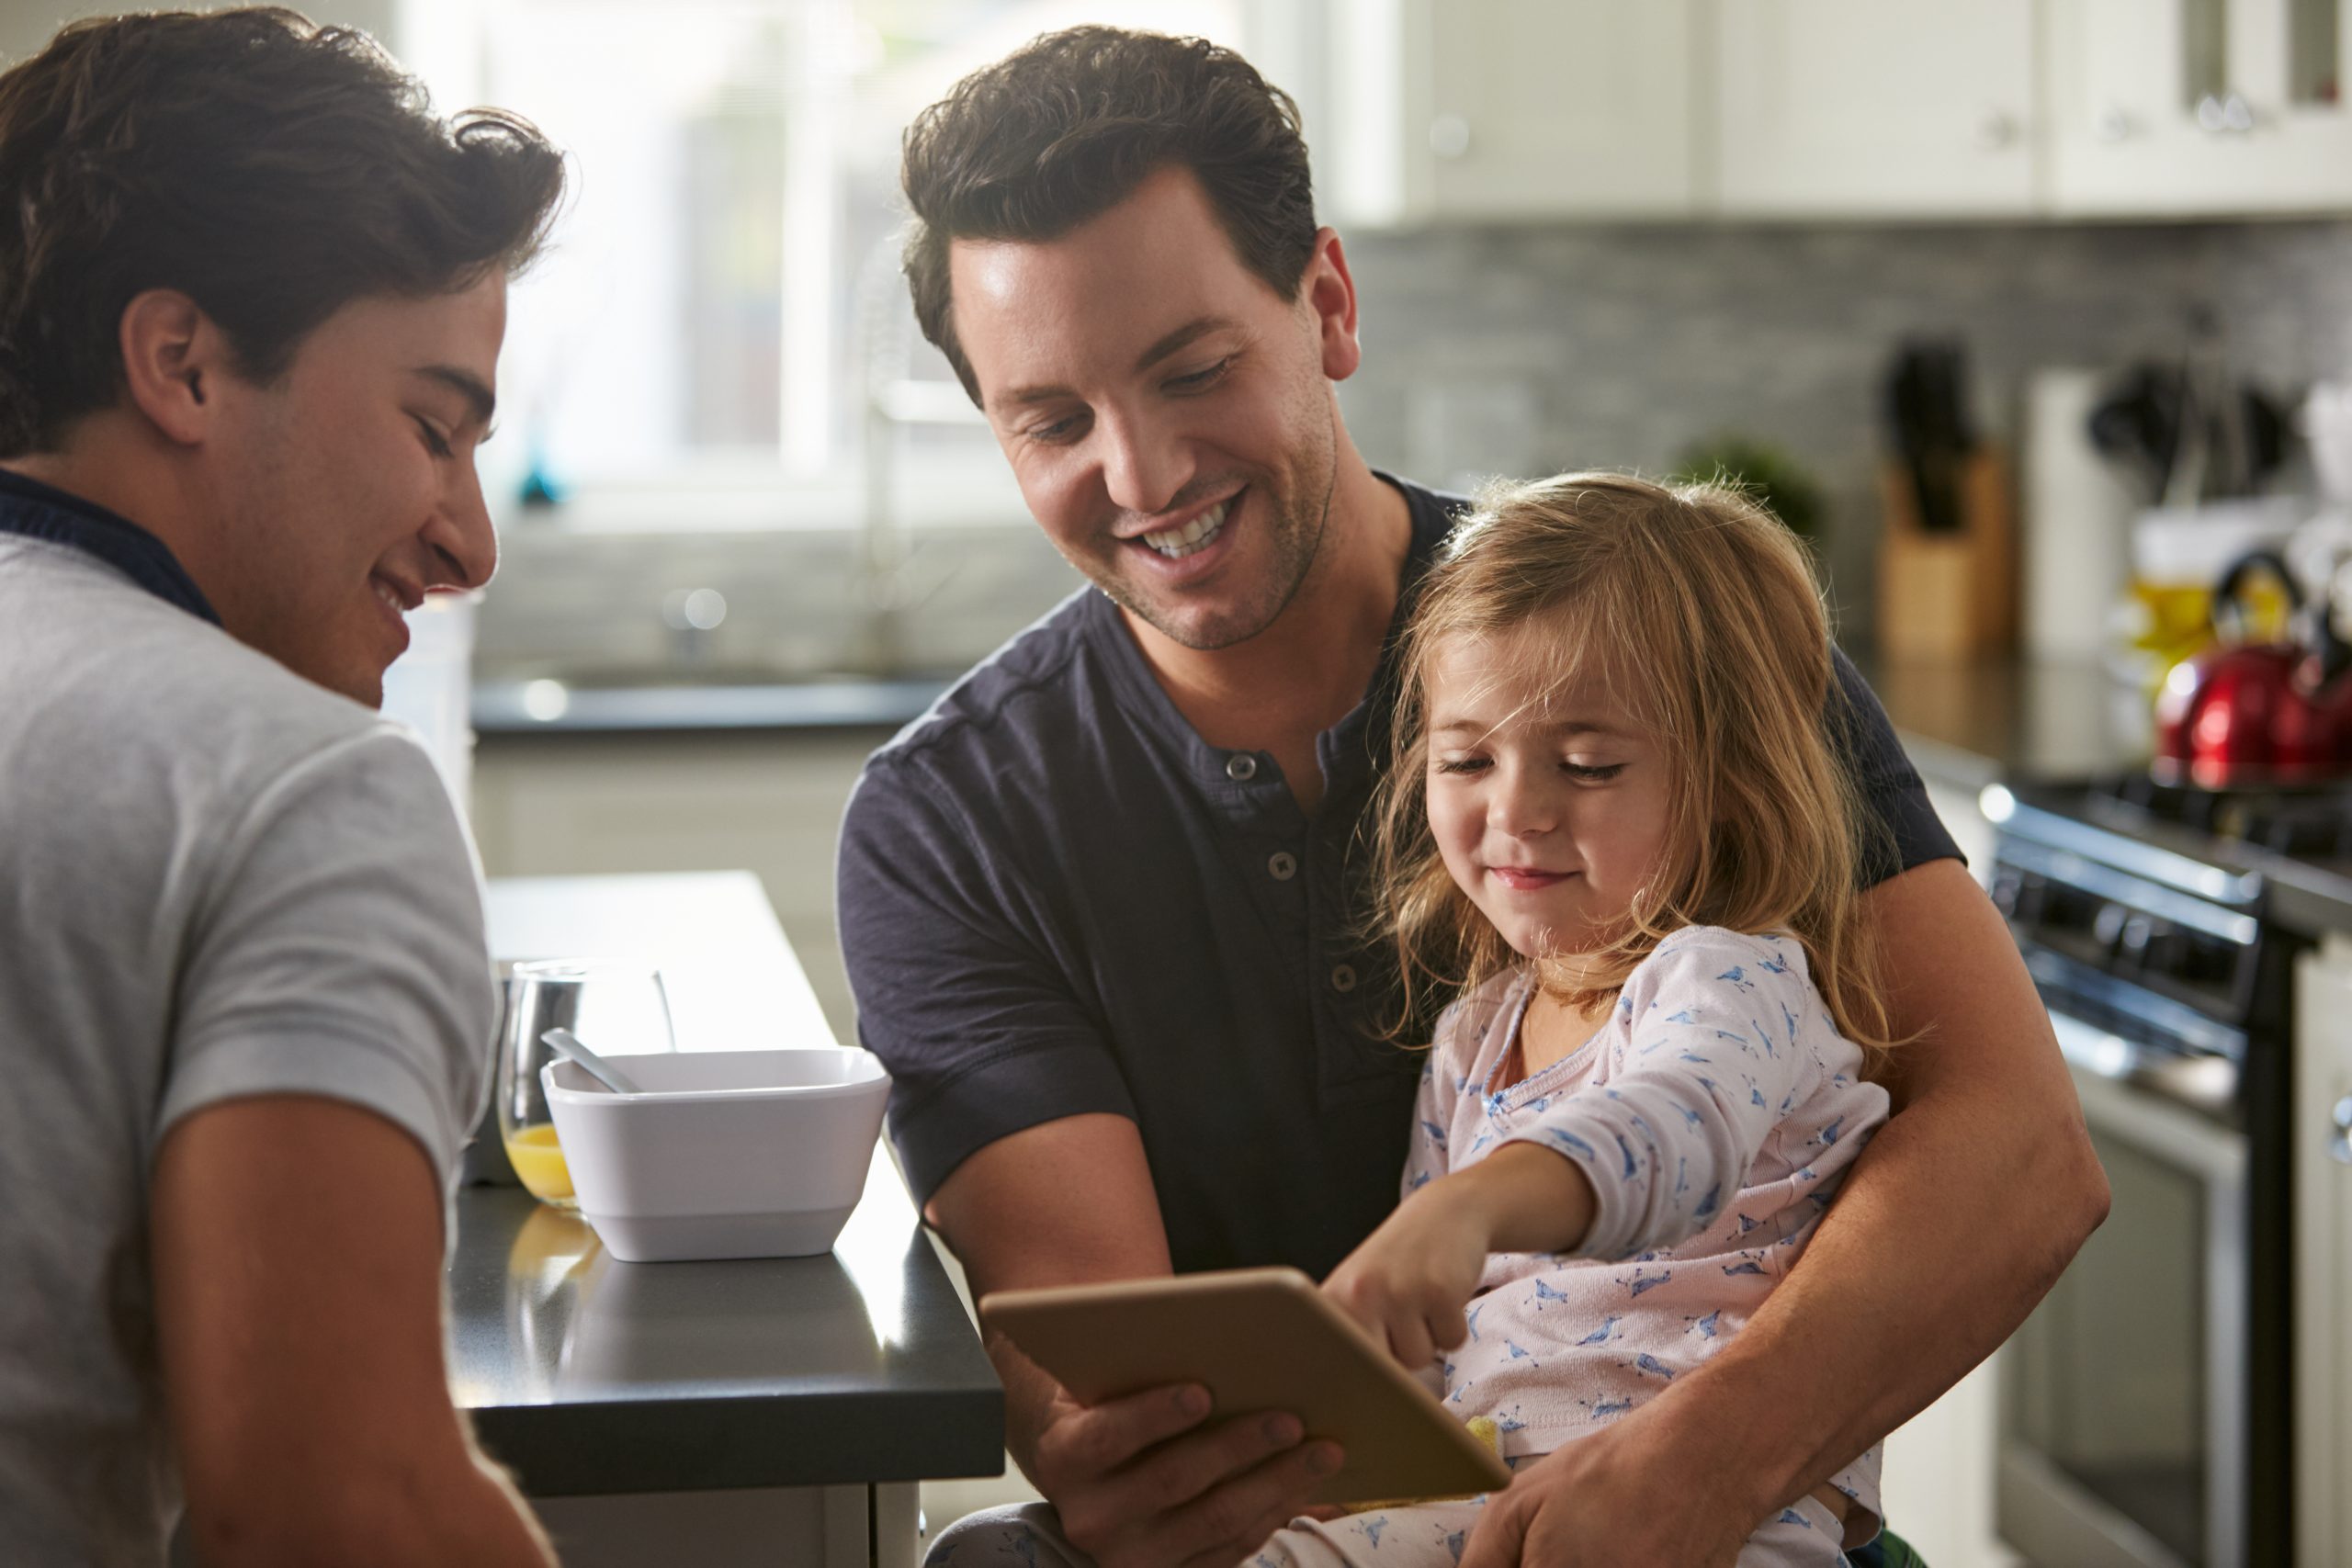 Male Gay Dads Use Tablet With Daughter In the Kitchen